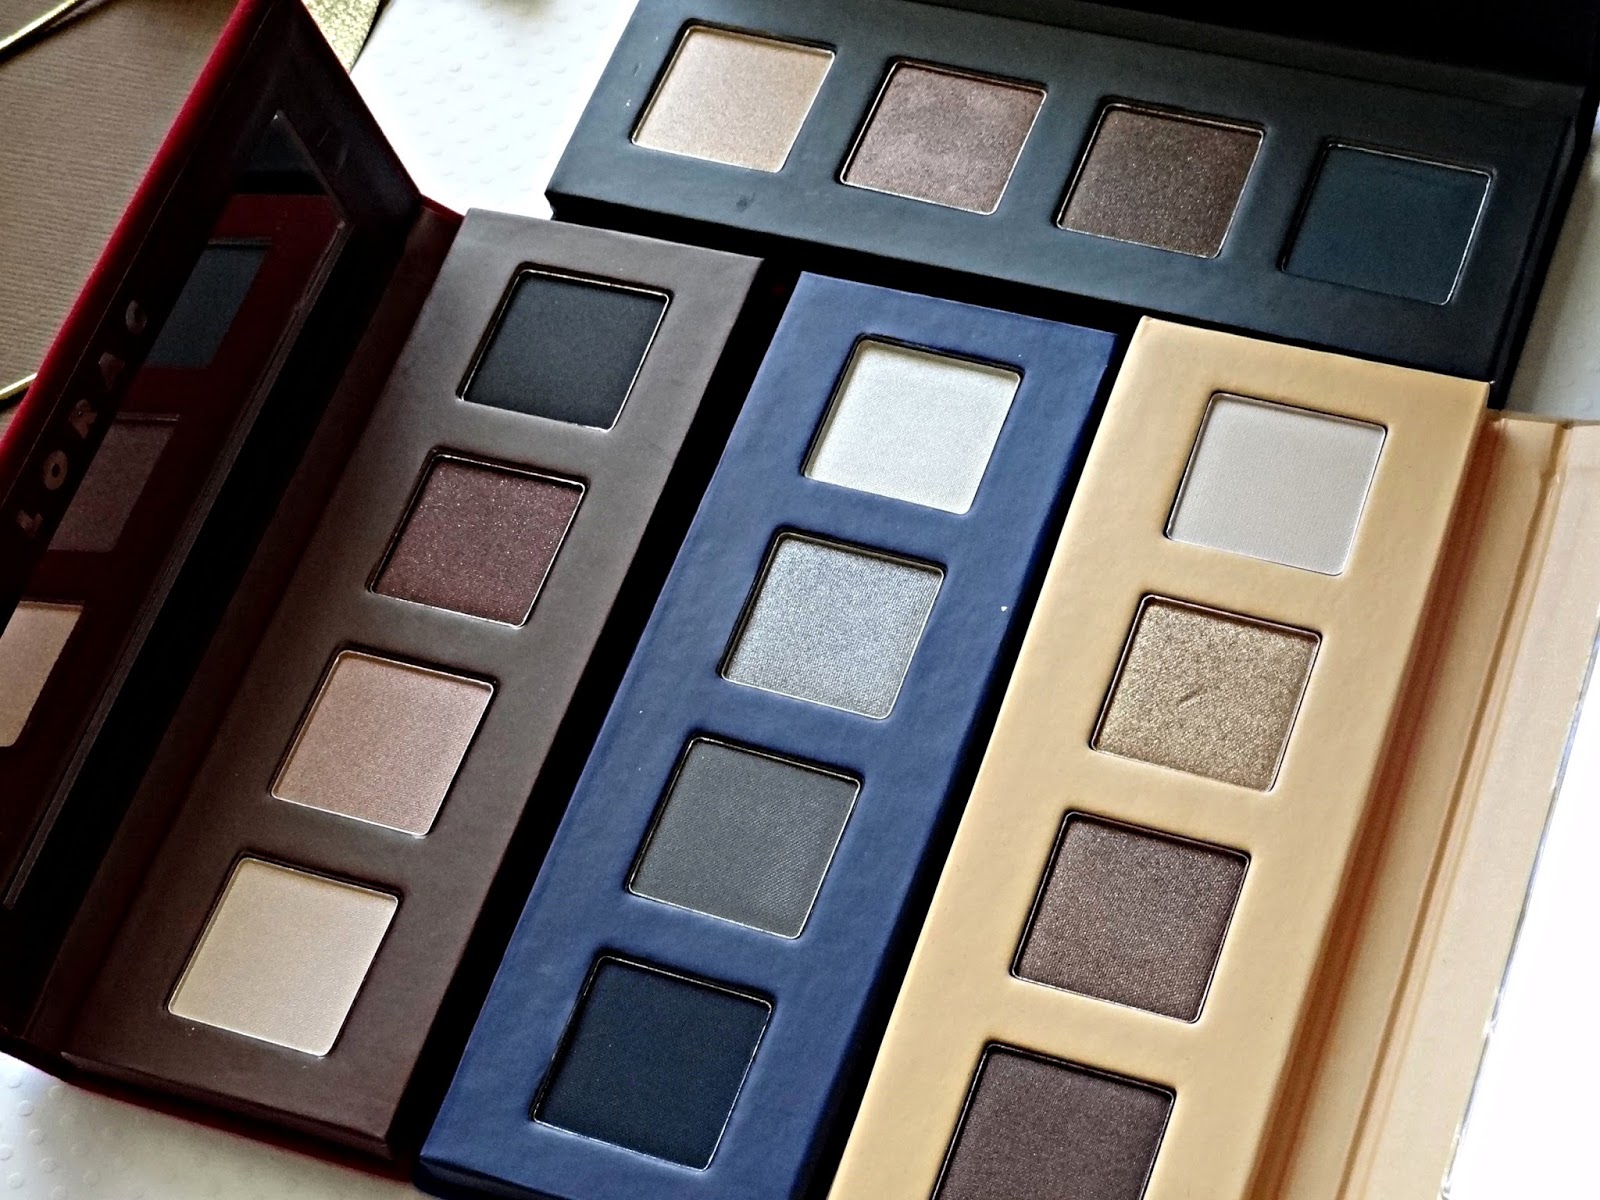 LORAC The Royal Eyeshadow Collection Holiday 2014 Review, Photos & Swatches